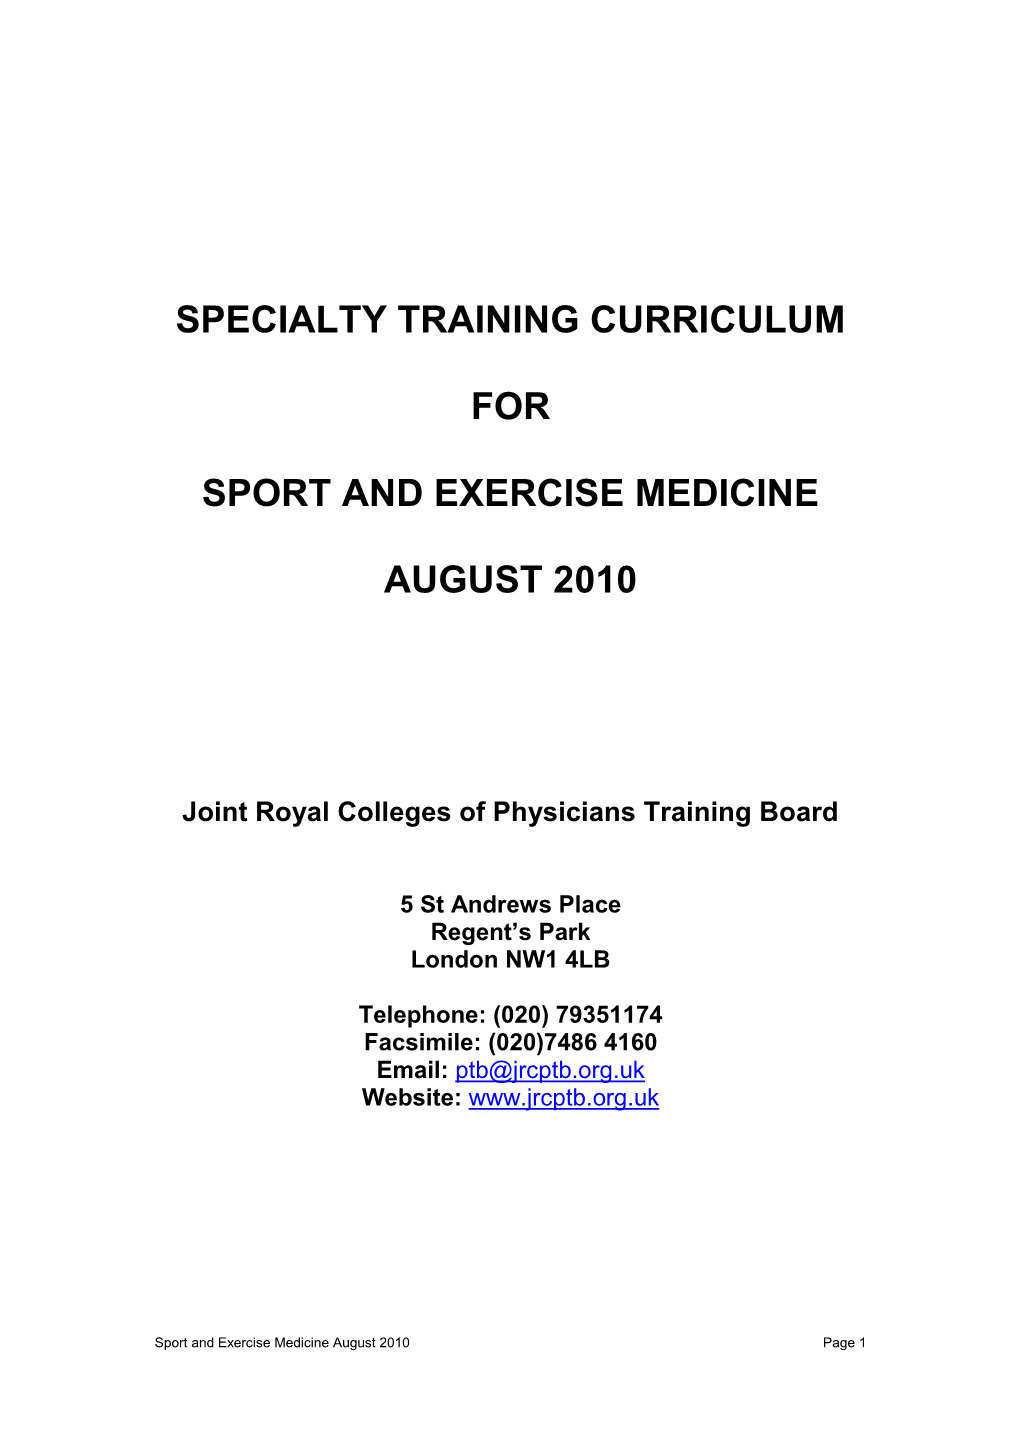 Specialty Training Curriculum for Sport and Exercise Medicine August 2010